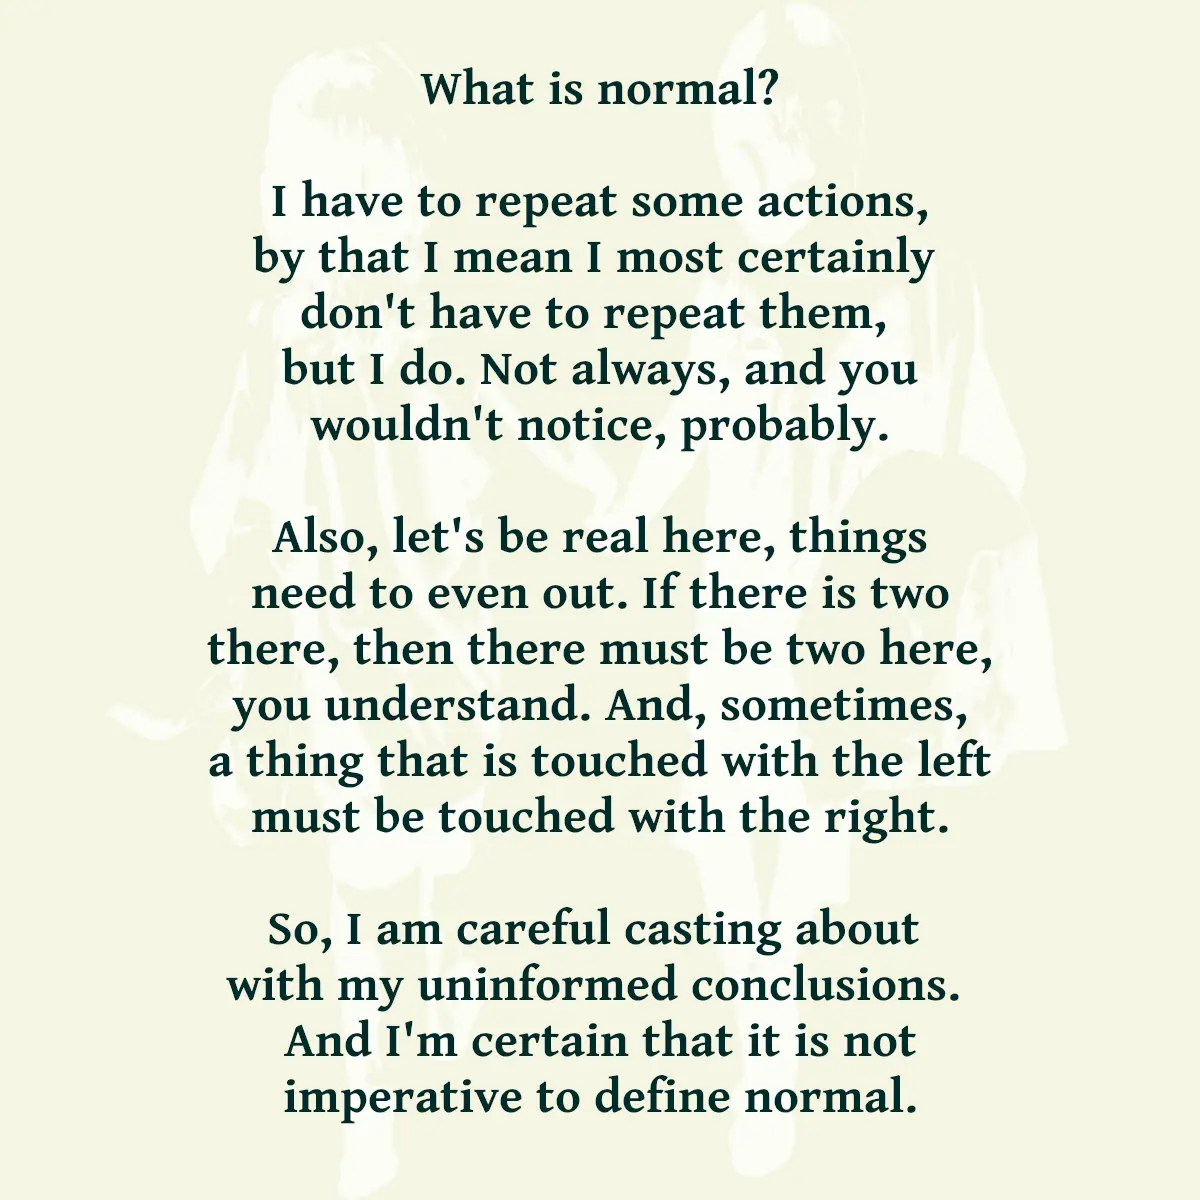 What is normal? I have to repeat some actions, by that I mean I most certainly don't have to repeat them, but I do. Not always, and you wouldn't notice, probably. Also, let's be real here, things need to even out. If there is two there, then there must be two here, you understand. And, sometimes, a thing that is touched with the left must be touched with the right. So, I am careful casting about with my uninformed conclusions. And I'm certain that it is not imperative to define normal.